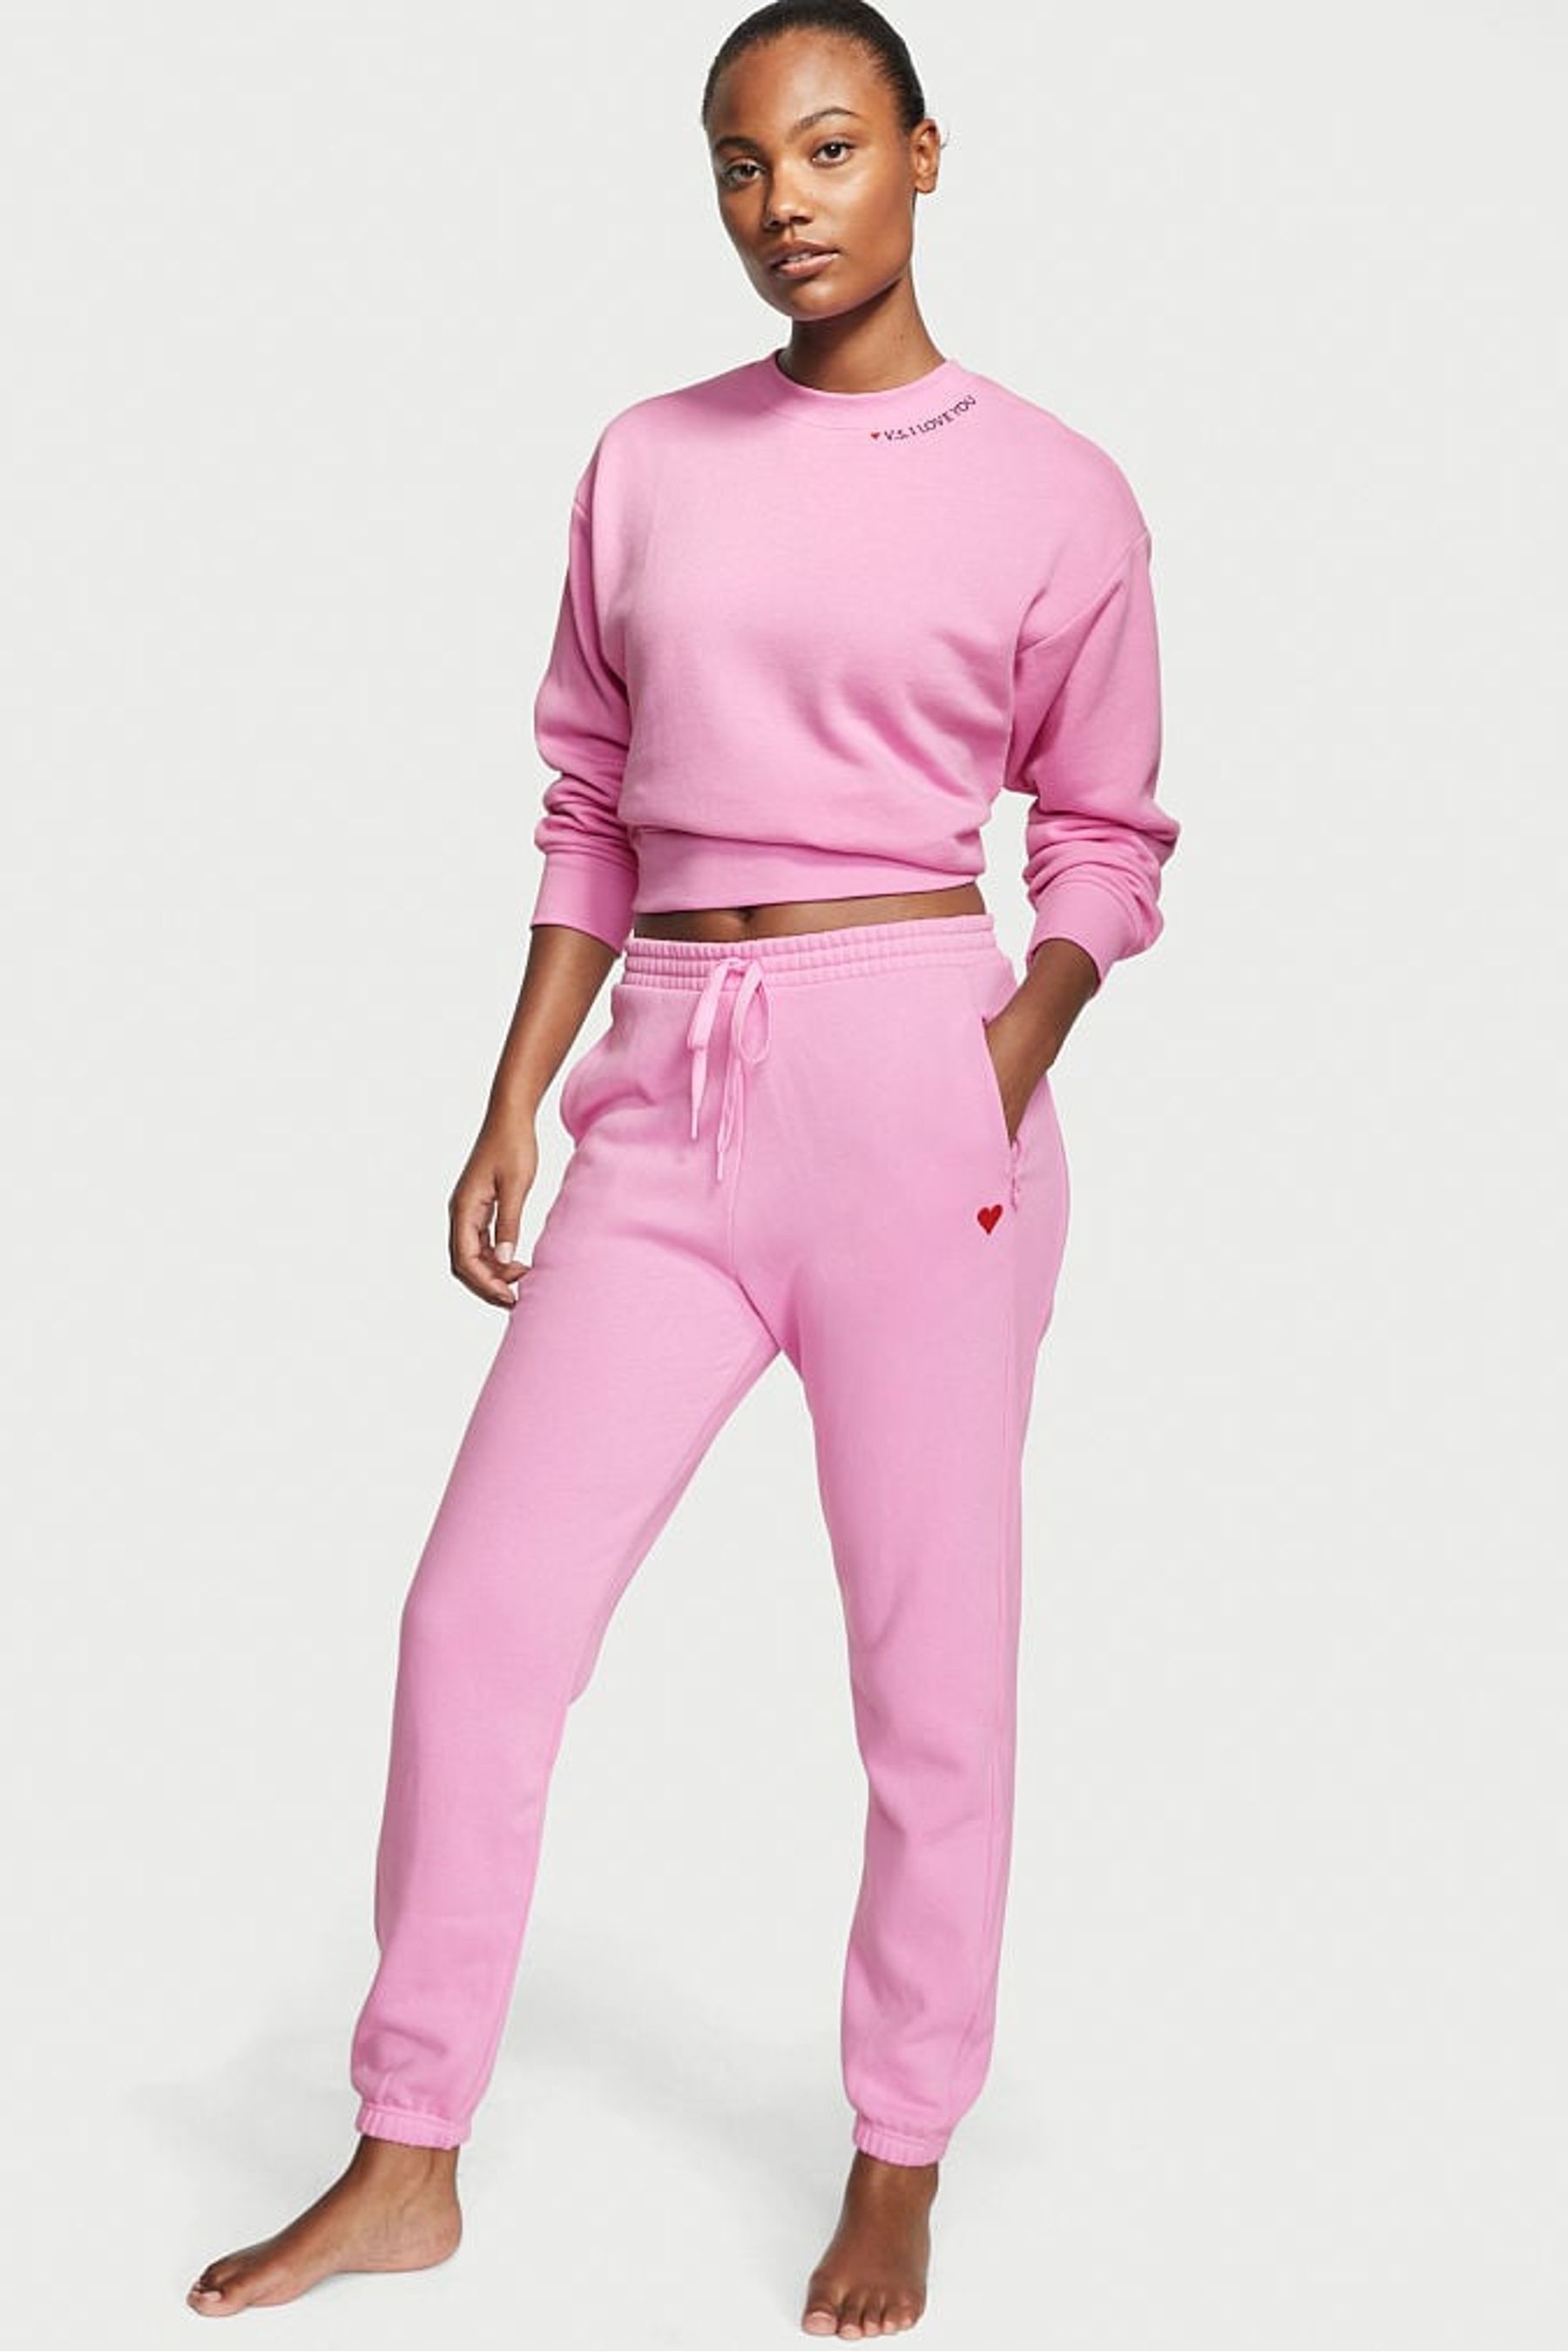 Buy Victoria's Secret Pink Cotton Fleece Lounge Joggers from the Next ...